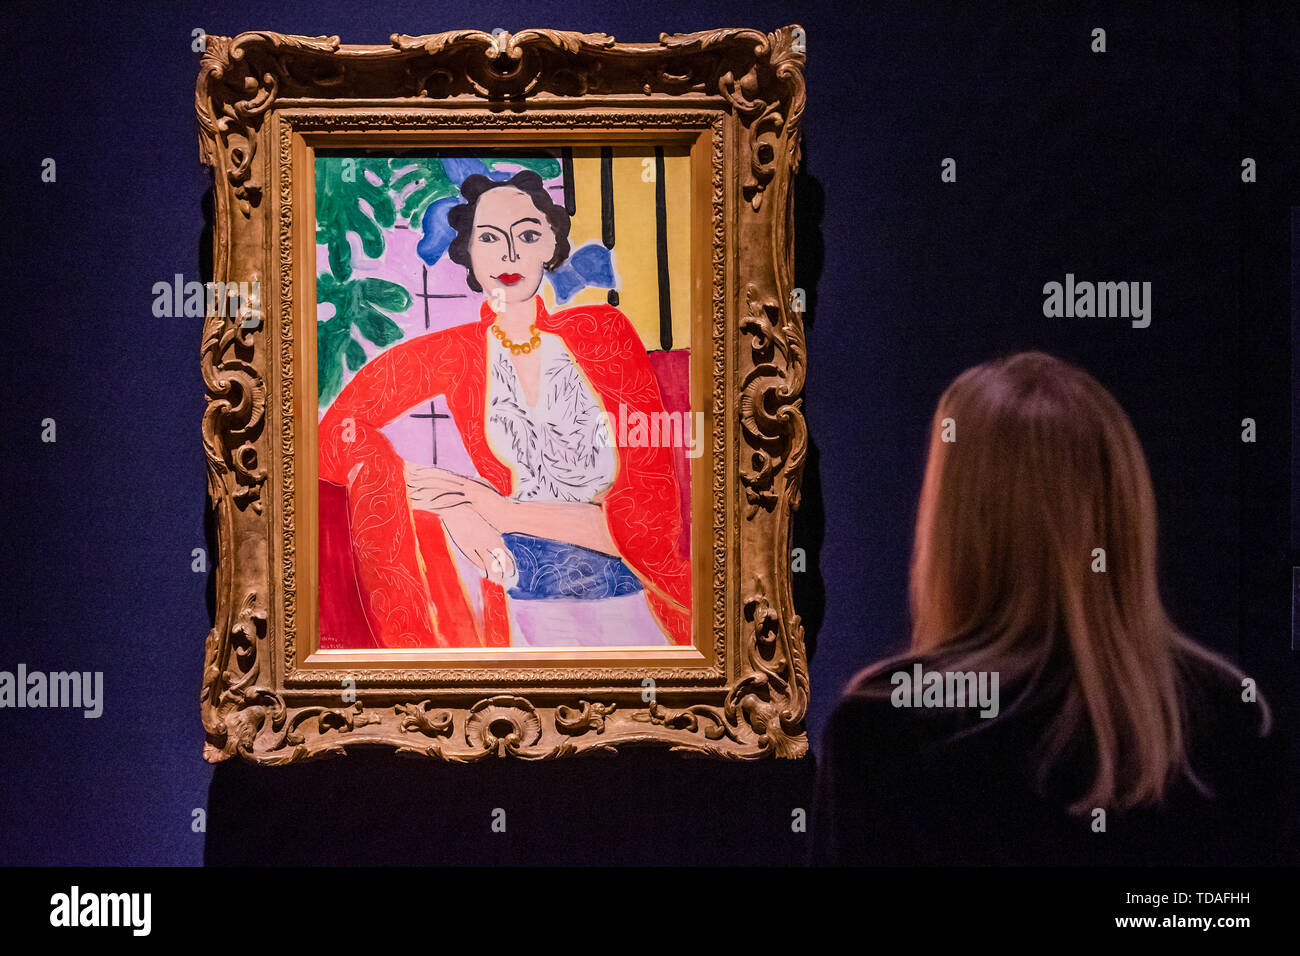 London, UK. 14th June, 2019. Henri Matisse (1869-1954) Le collier d'ambre,  est £5-8m, - A preview of Christie's Modern British Art and Impressionist  and Modern Art Sales. They are on view to